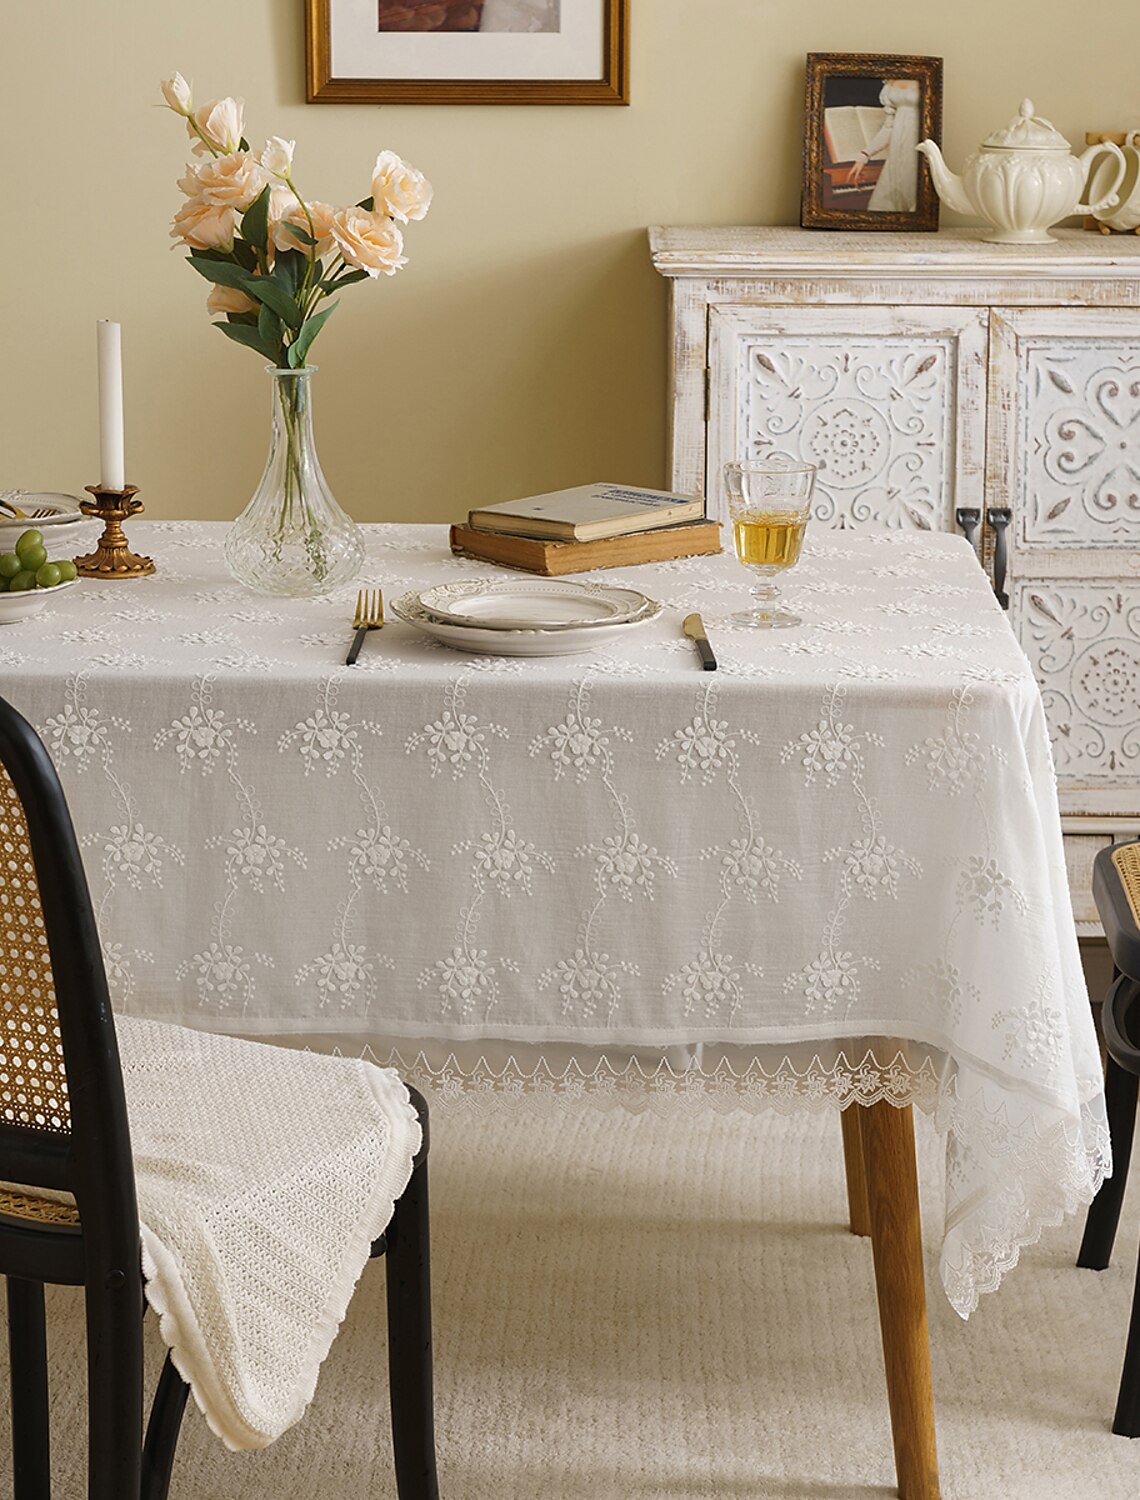 Contton Linen Rectangle Lace Tablecloth Pastoral Rustic Table Cloth  Washable Table Cover for IndoorOutdoor,Farmhouse Decor,Picnic,Tabletop  Decoration 9239566 2022 – $25.19